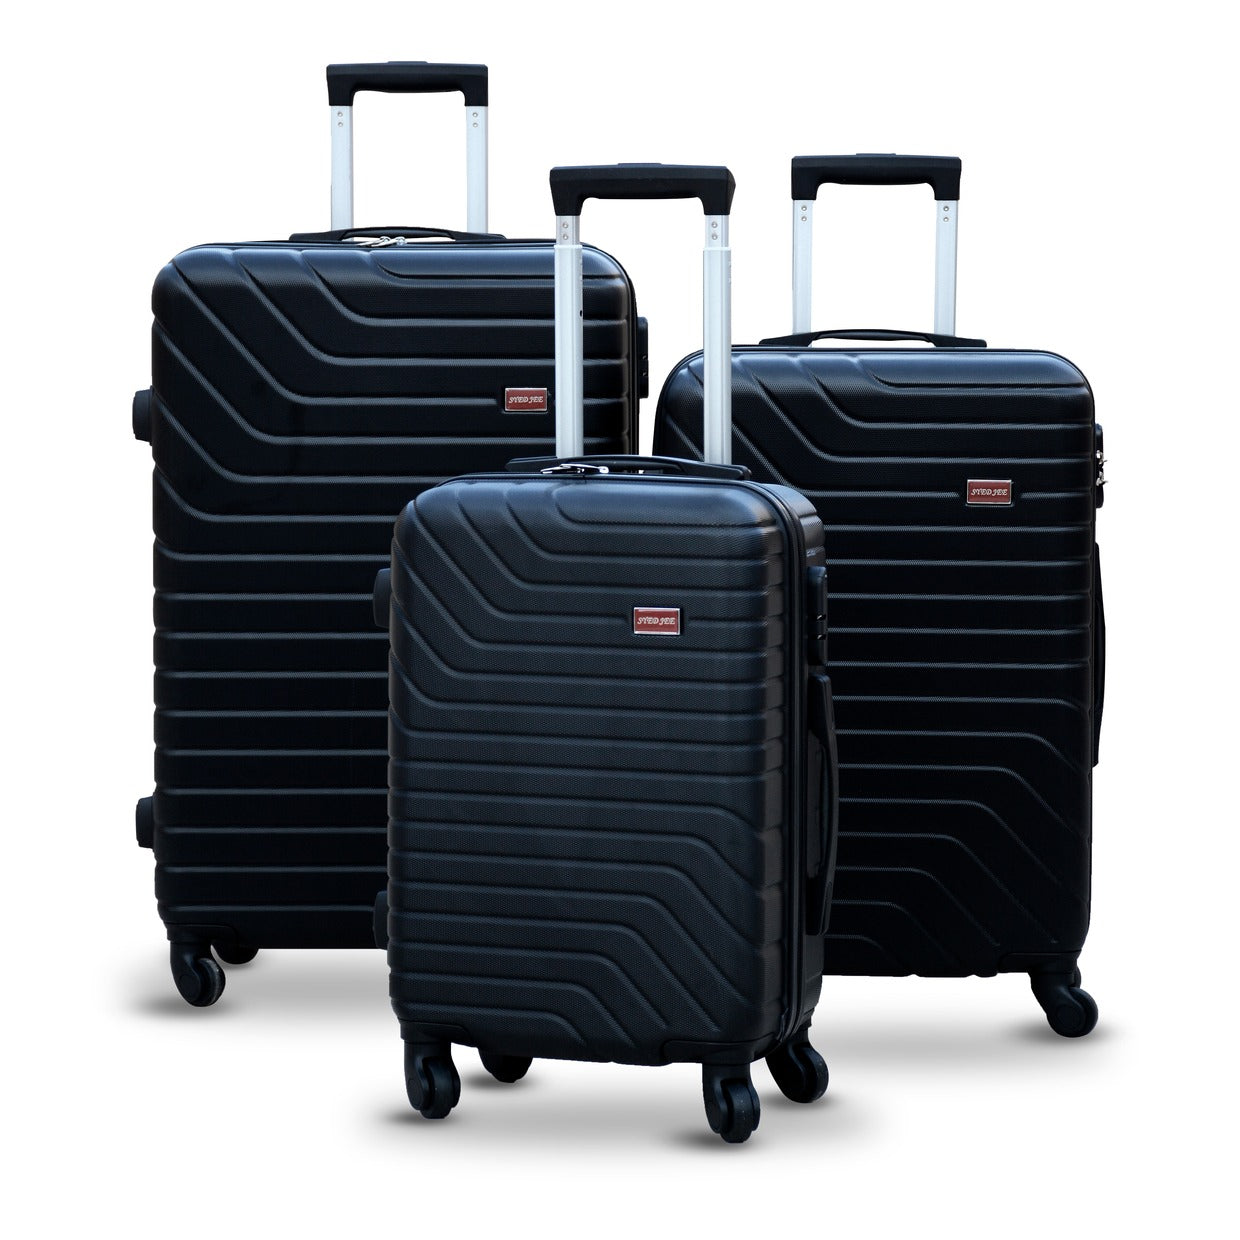 3 Pcs Set 20" 24" 28 Inches Black SJ New ABS Lightweight Travel Luggage Bag With Spinner Wheel